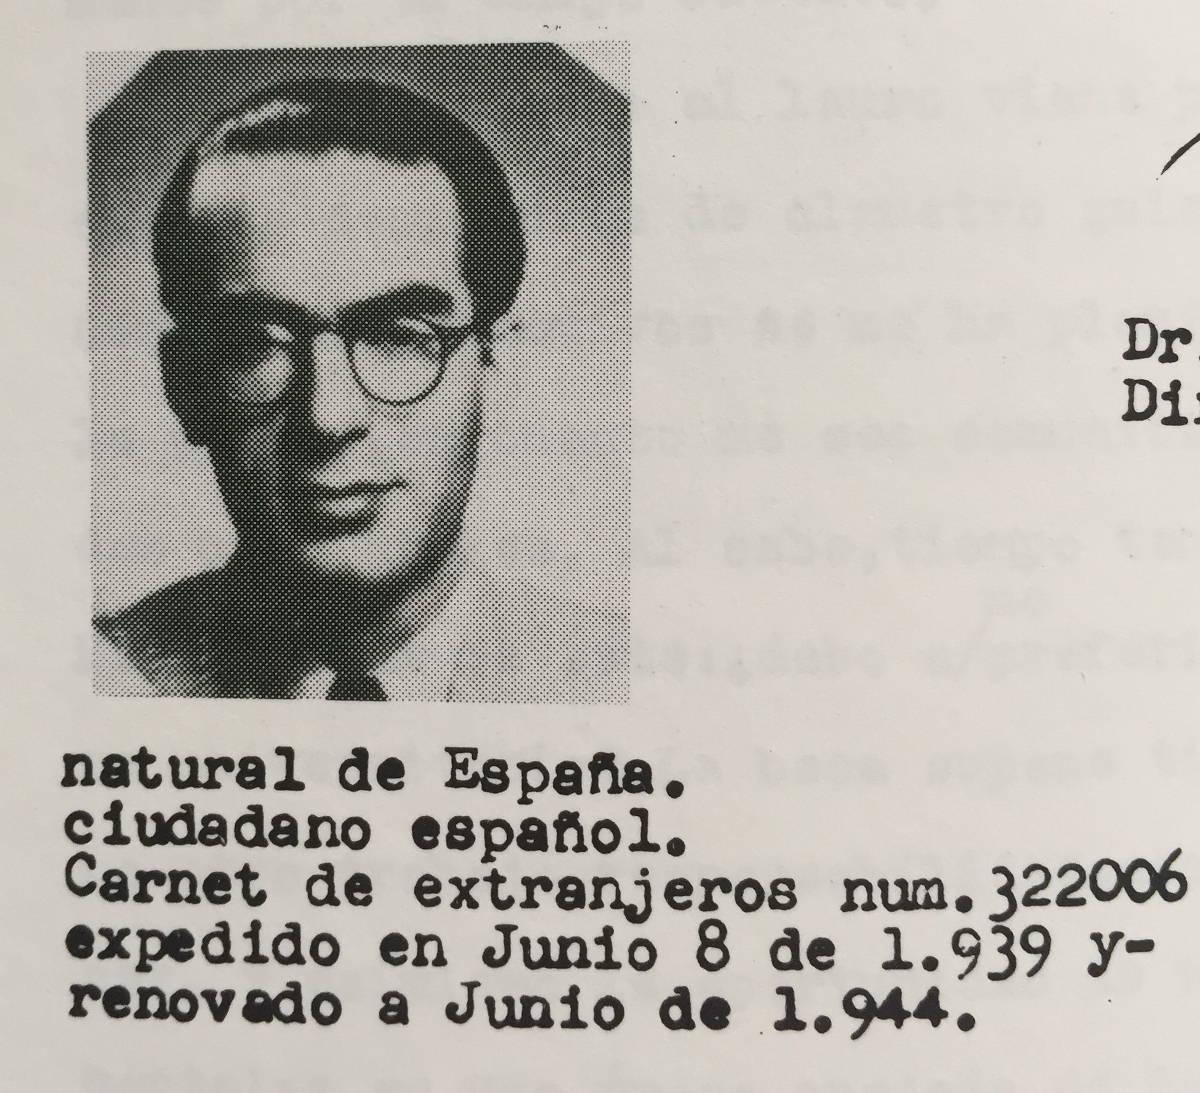 Migrant card of the exile writer and academic José Rubia Barcia (web)